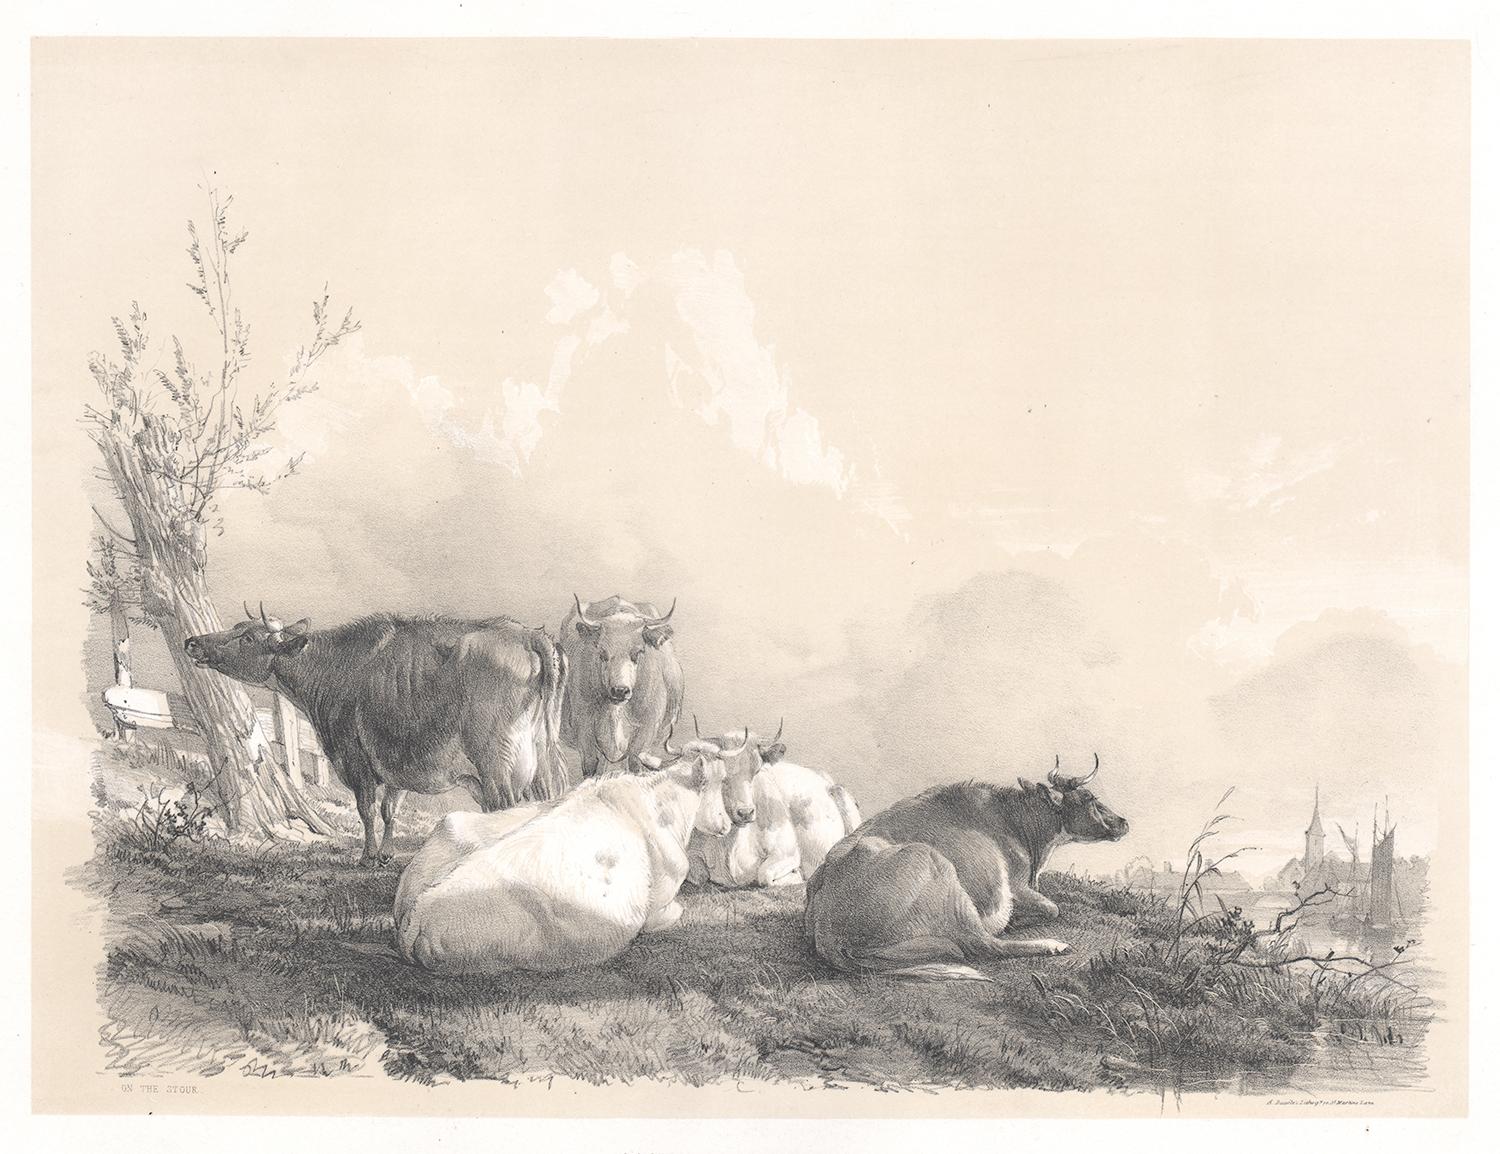 On the Stour, tinted lithograph of cattle, by Thomas Sydney Cooper, 1837